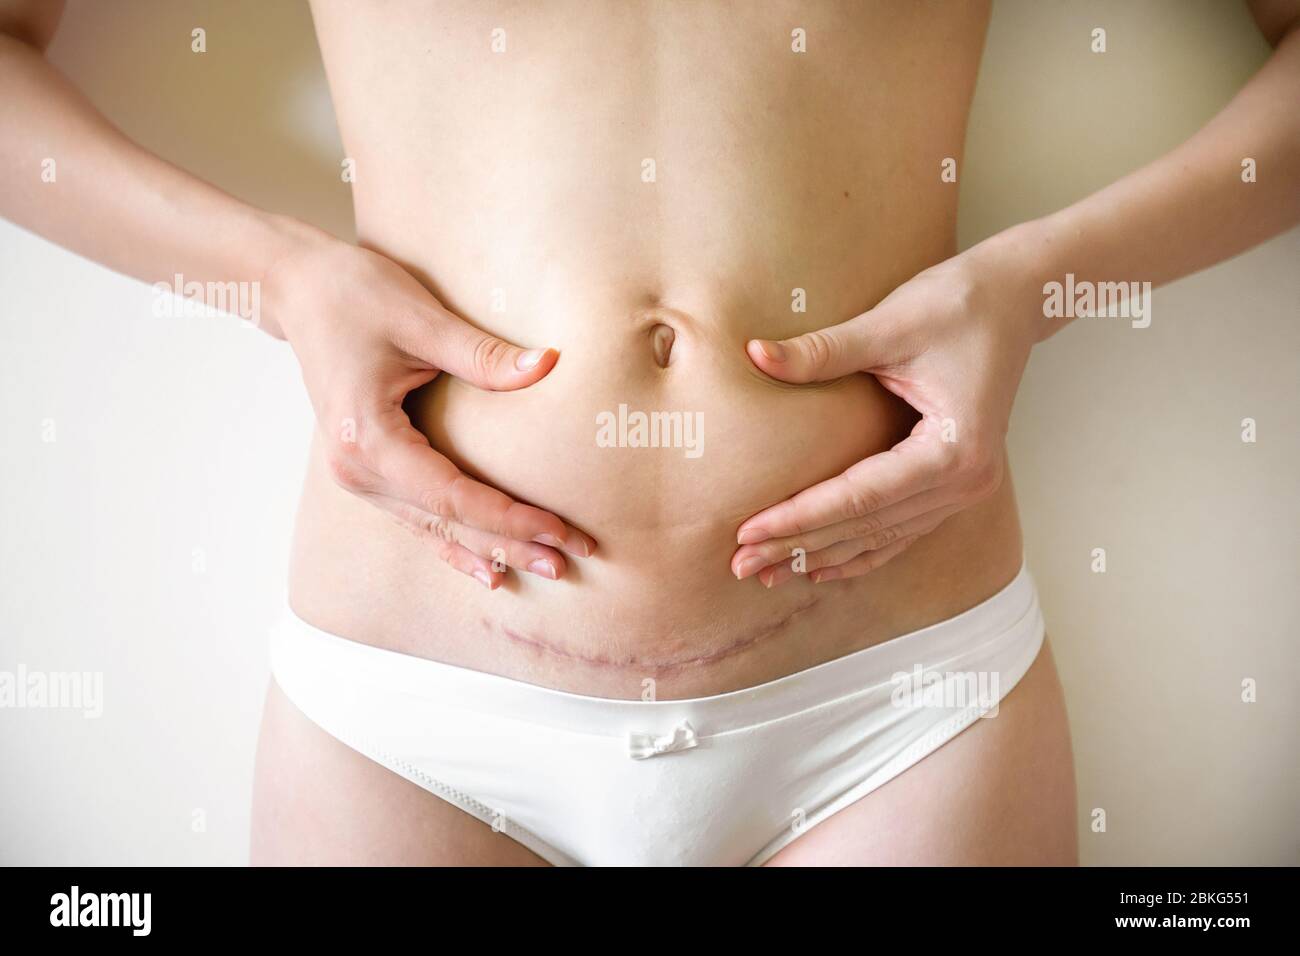 Woman grabbing the loose skin on stomach after giving birth by caserean section Stock Photo